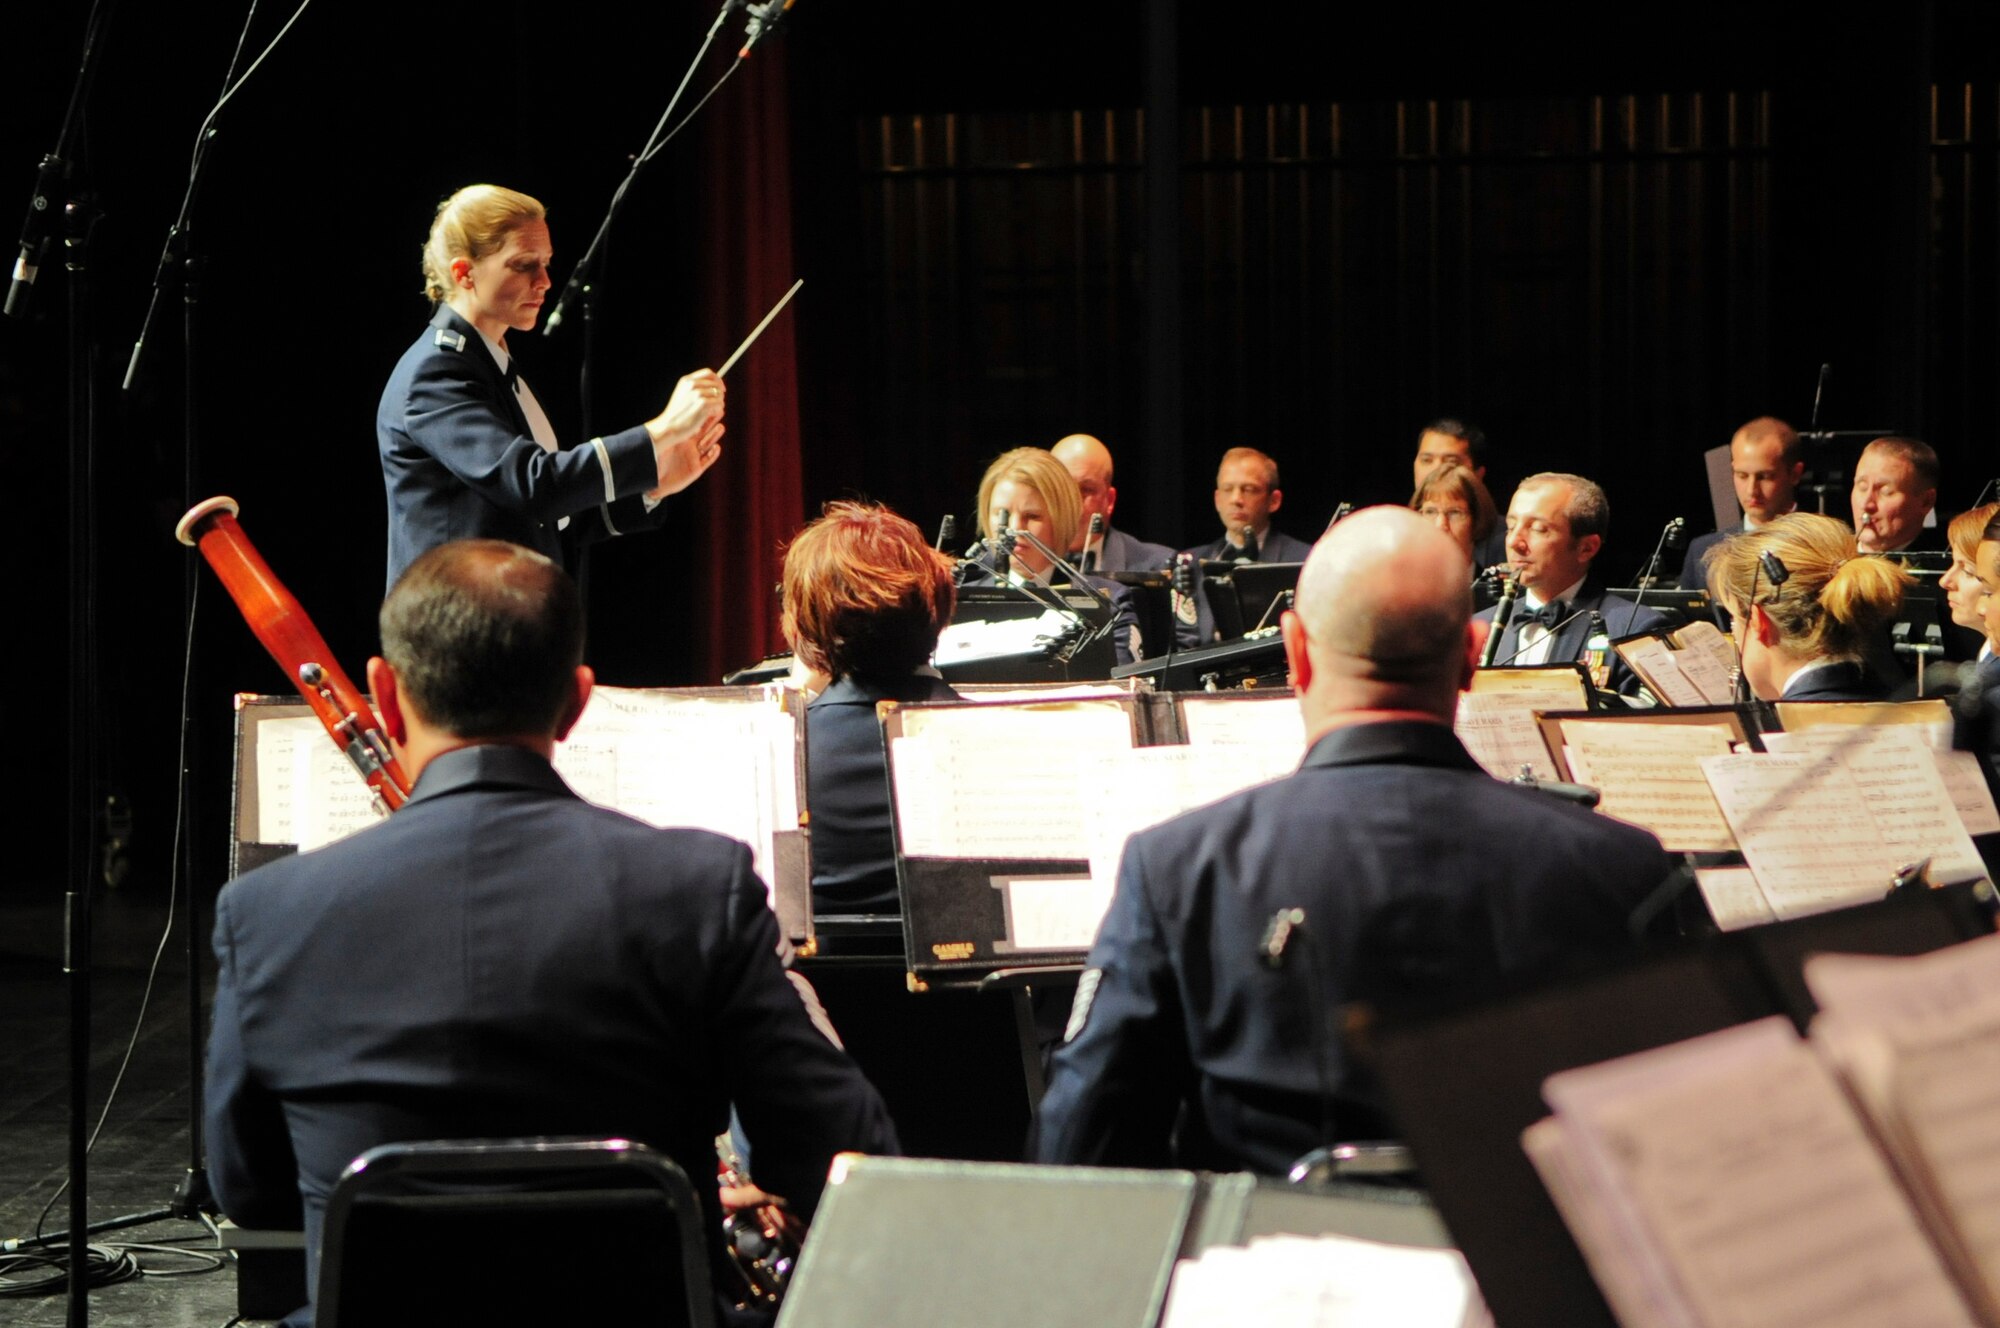 Capt. Haley Armstrong, commander and conductor of the United States Air Force Band of the Golden West, directs the band during a holiday concert performance at the Sacramento Convention Center Nov. 30, 2011. The Band of the Golden West plays as many as 350 performances, ceremonies and military events every year, and can be broken into six smaller groups including a rock band. (U.S. Air Force photo by Staff Sgt. Sarah Brown/RELEASED)